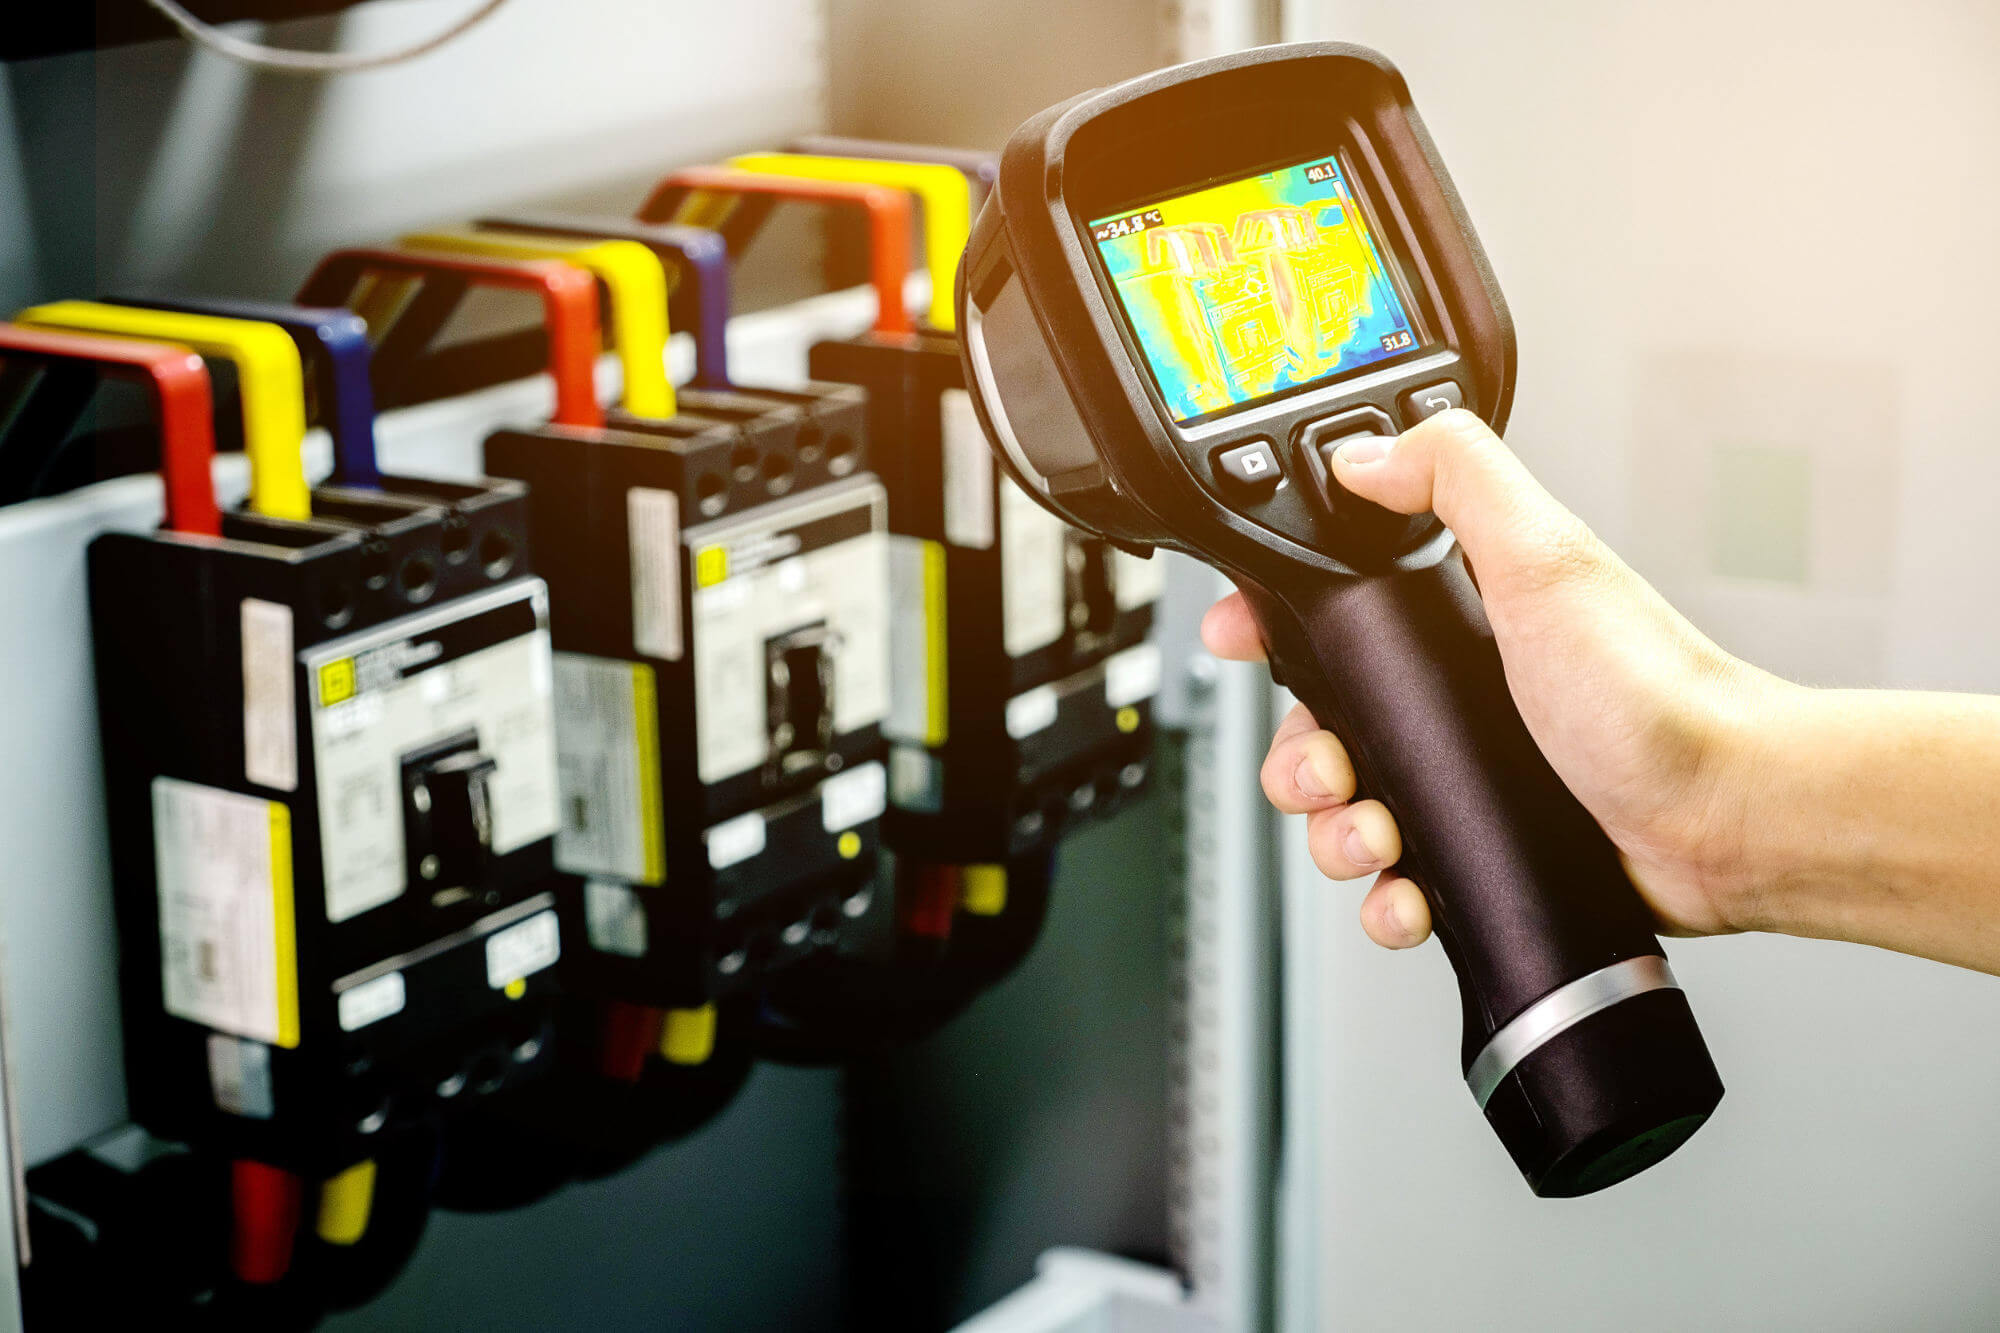 Technician checking temperature with thermal imaging camera